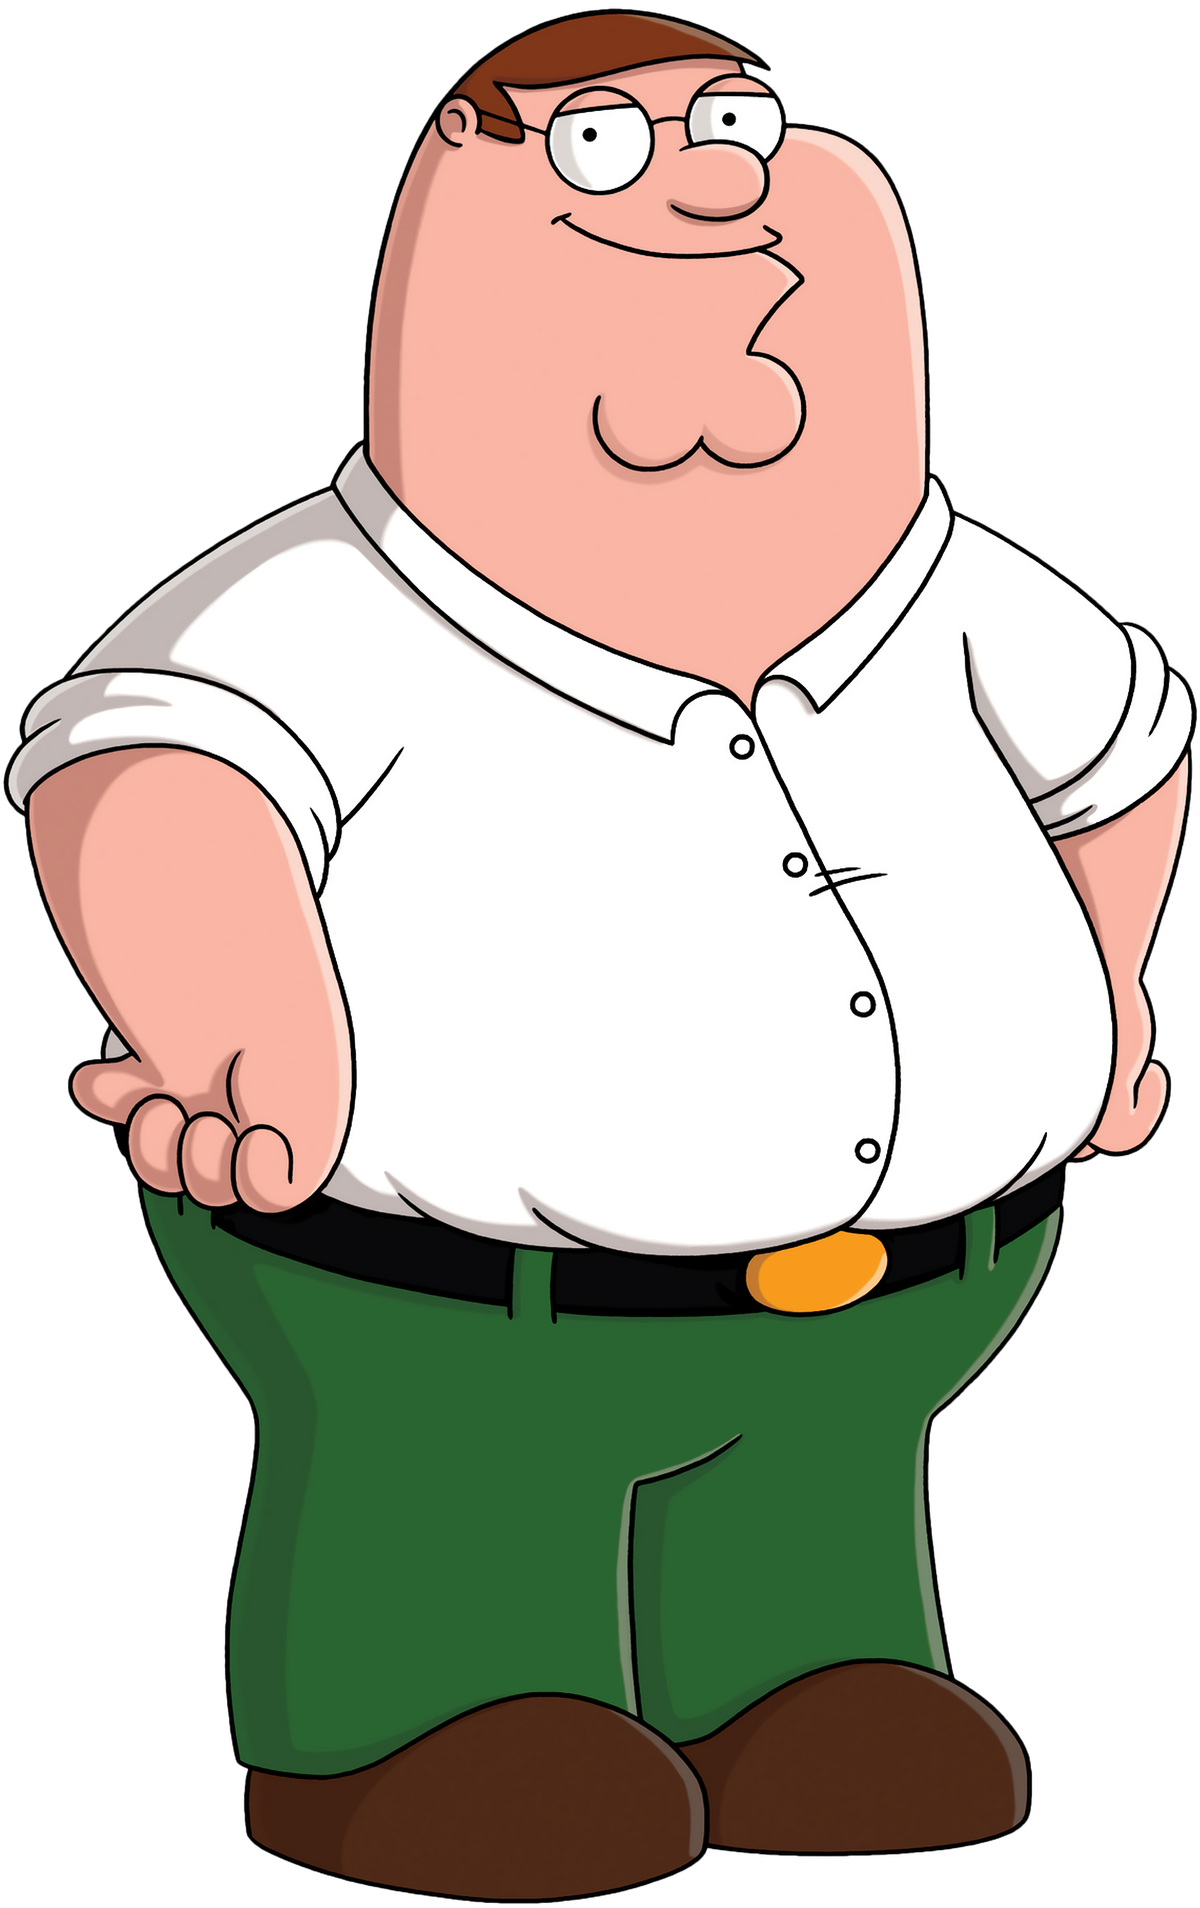 Big Trouble in Little Quahog: Anime Peter Walkthrough | Family Guy Addicts